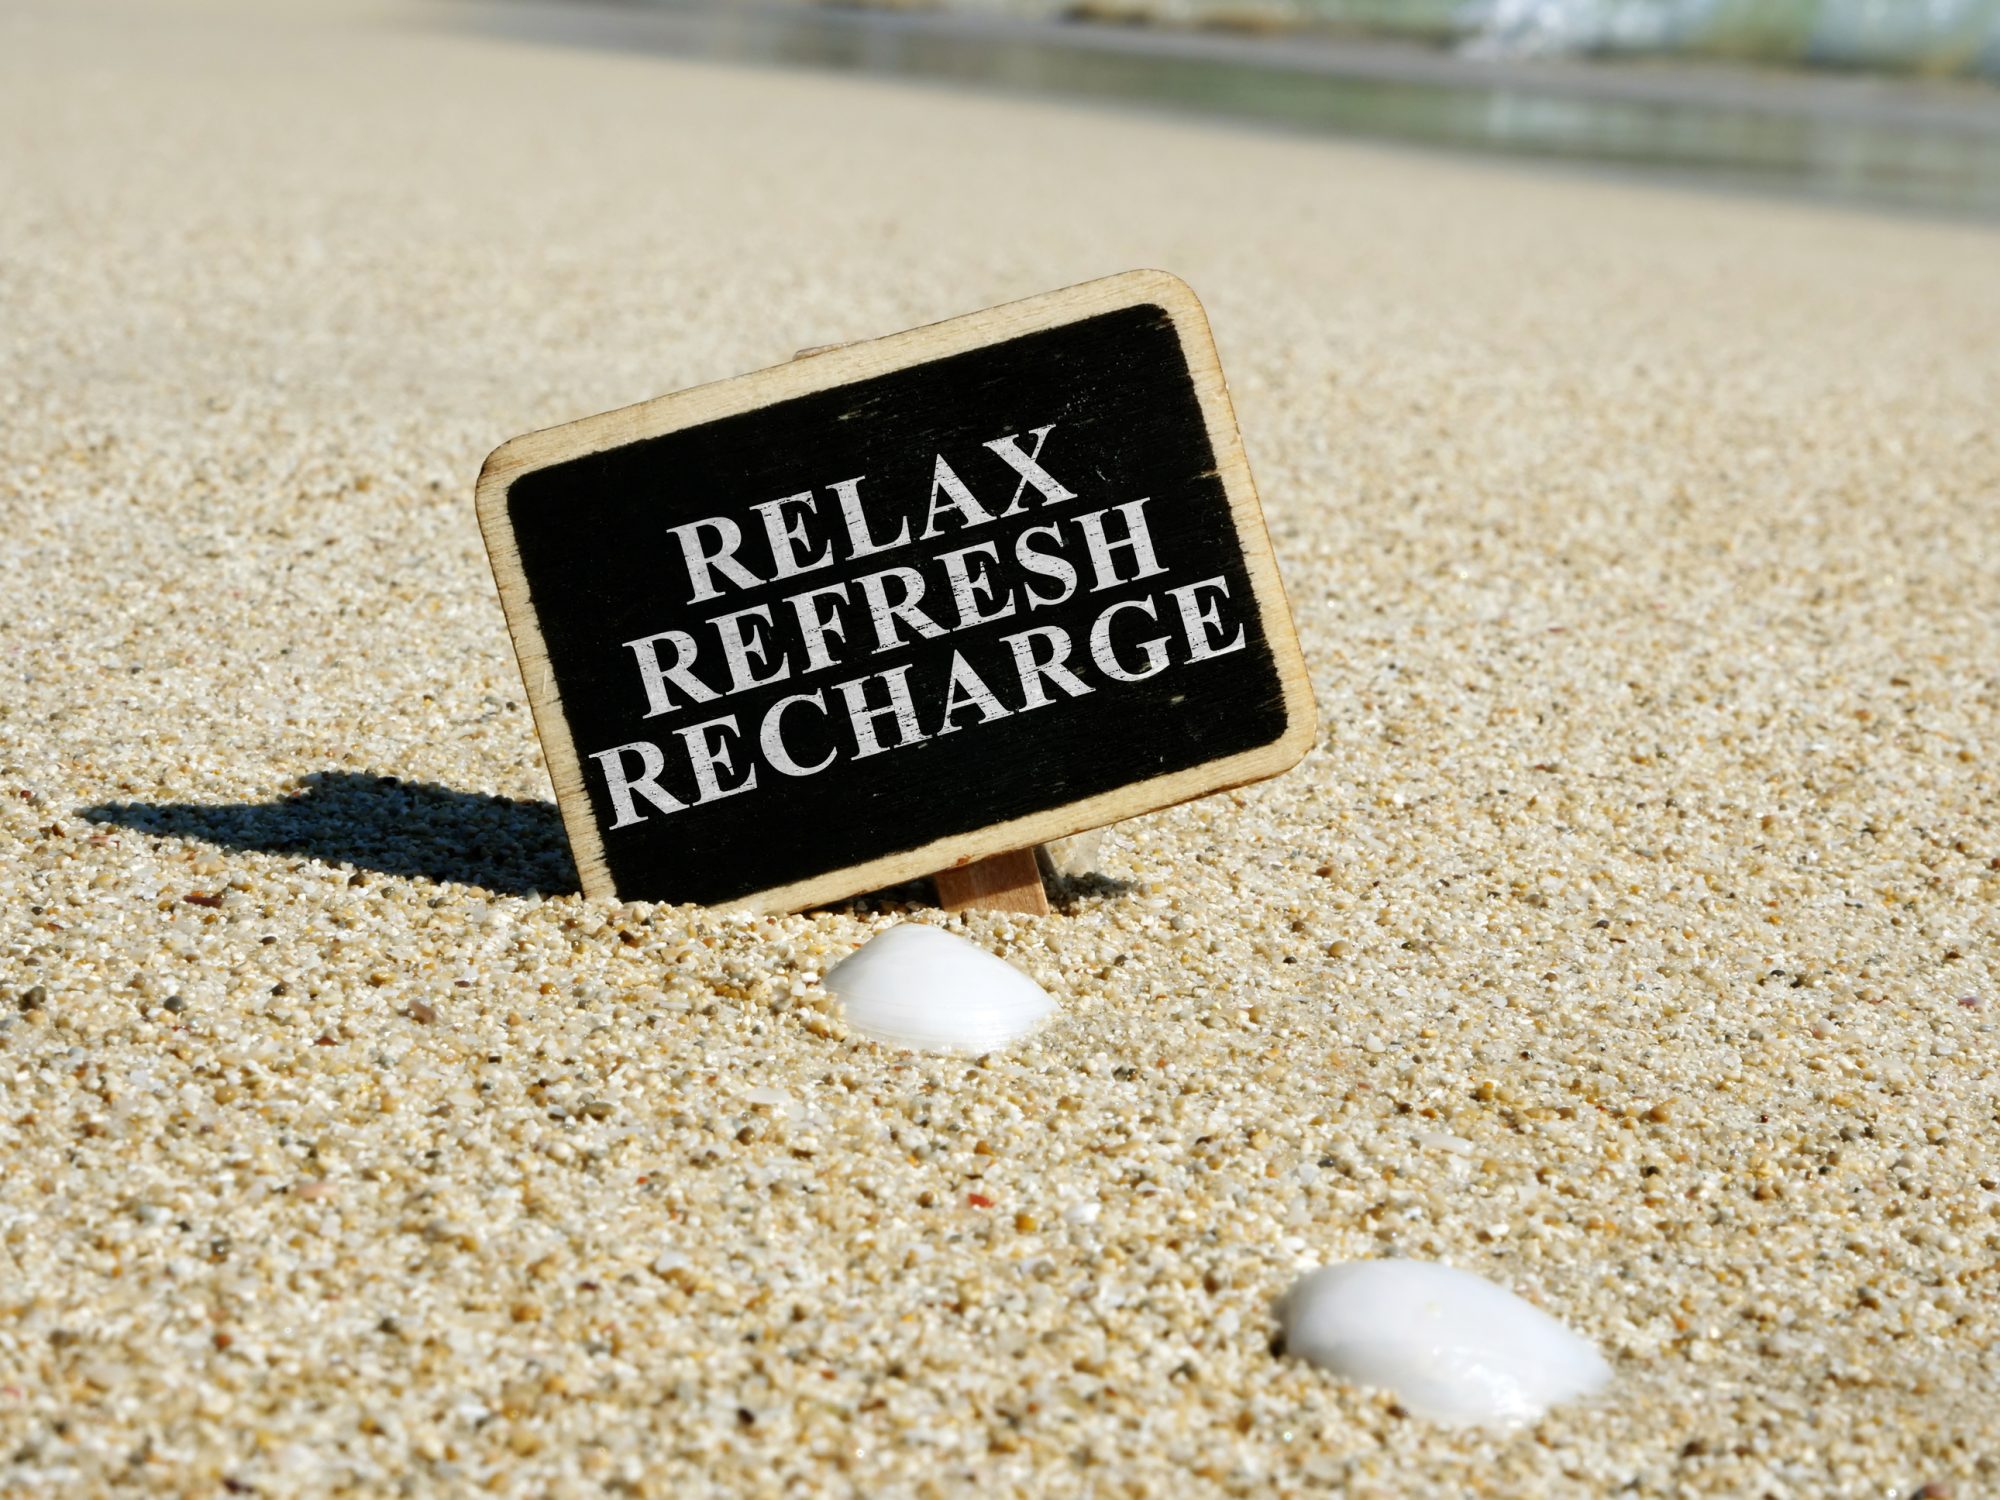 Relax refresh recharge sign on a beach